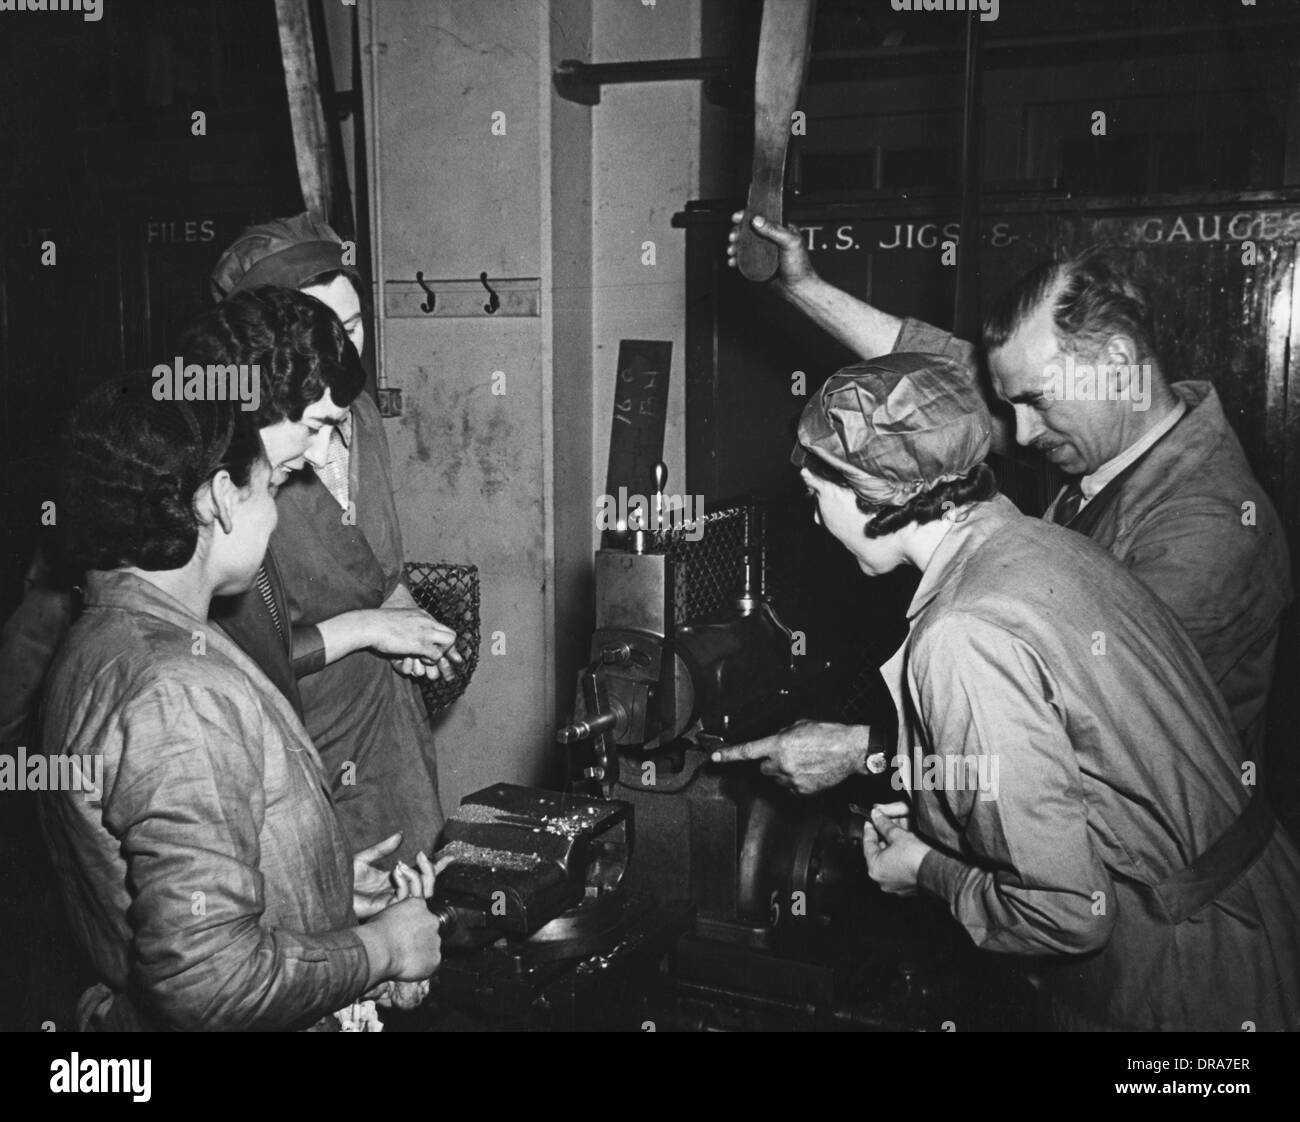 Munitions Factory WWII Stock Photo